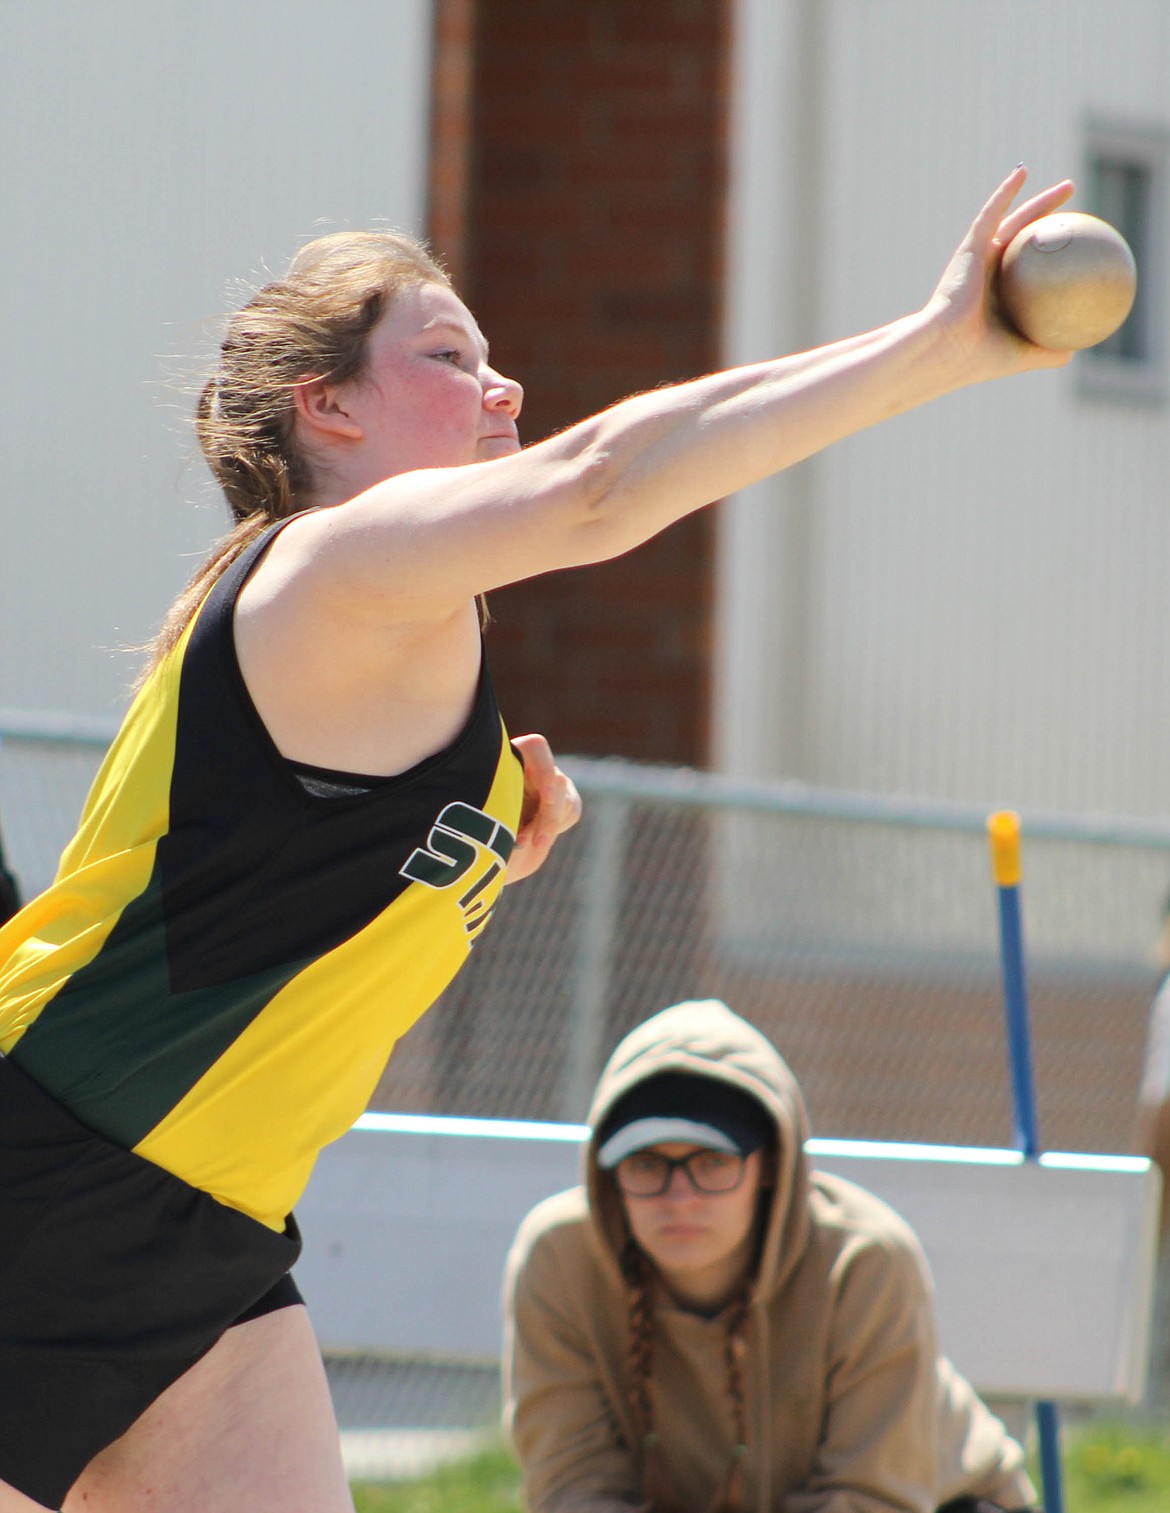 GRACE KING throws during the shot put event. She placed 31st with an effort of 24-03.50. (Maggie Dresser/Mineral Independent)